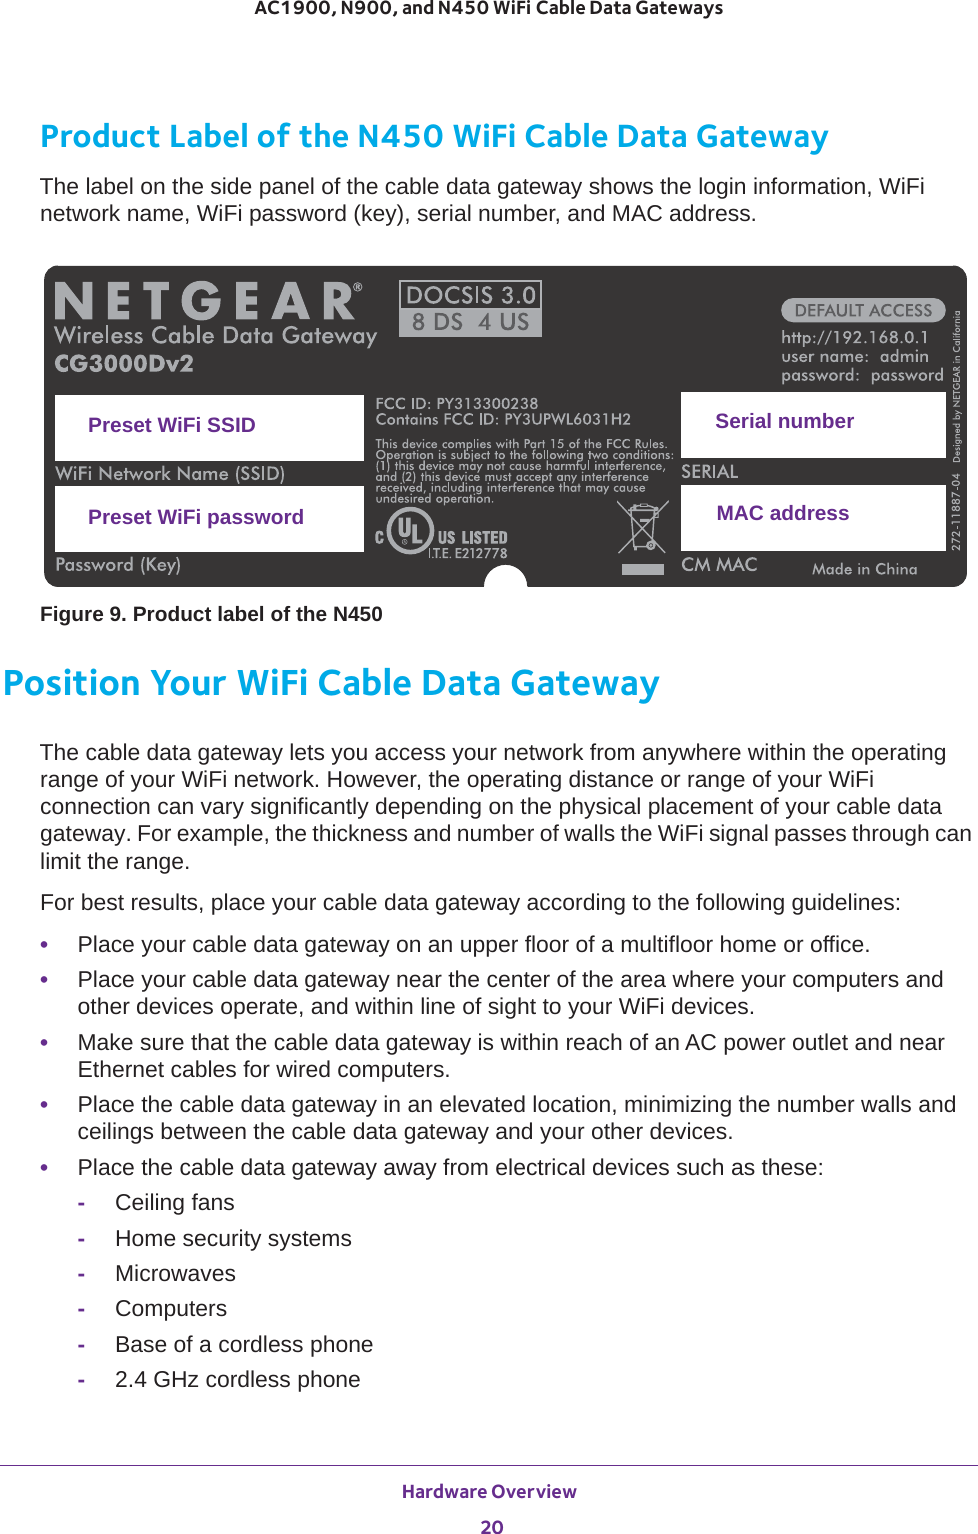 Hardware Overview 20AC1900, N900, and N450 WiFi Cable Data Gateways Product Label of the N450 WiFi Cable Data GatewayThe label on the side panel of the cable data gateway shows the login information, WiFi network name, WiFi password (key), serial number, and MAC address.Preset WiFi SSIDPreset WiFi passwordSerial numberMAC addressFigure 9. Product label of the N450Position Your WiFi Cable Data GatewayThe cable data gateway lets you access your network from anywhere within the operating range of your WiFi network. However, the operating distance or range of your WiFi connection can vary significantly depending on the physical placement of your cable data gateway. For example, the thickness and number of walls the WiFi signal passes through can limit the range. For best results, place your cable data gateway according to the following guidelines: •Place your cable data gateway on an upper floor of a multifloor home or office.•Place your cable data gateway near the center of the area where your computers and other devices operate, and within line of sight to your WiFi devices.•Make sure that the cable data gateway is within reach of an AC power outlet and near Ethernet cables for wired computers.•Place the cable data gateway in an elevated location, minimizing the number walls and ceilings between the cable data gateway and your other devices. •Place the cable data gateway away from electrical devices such as these:-Ceiling fans-Home security systems-Microwaves-Computers-Base of a cordless phone-2.4 GHz cordless phone